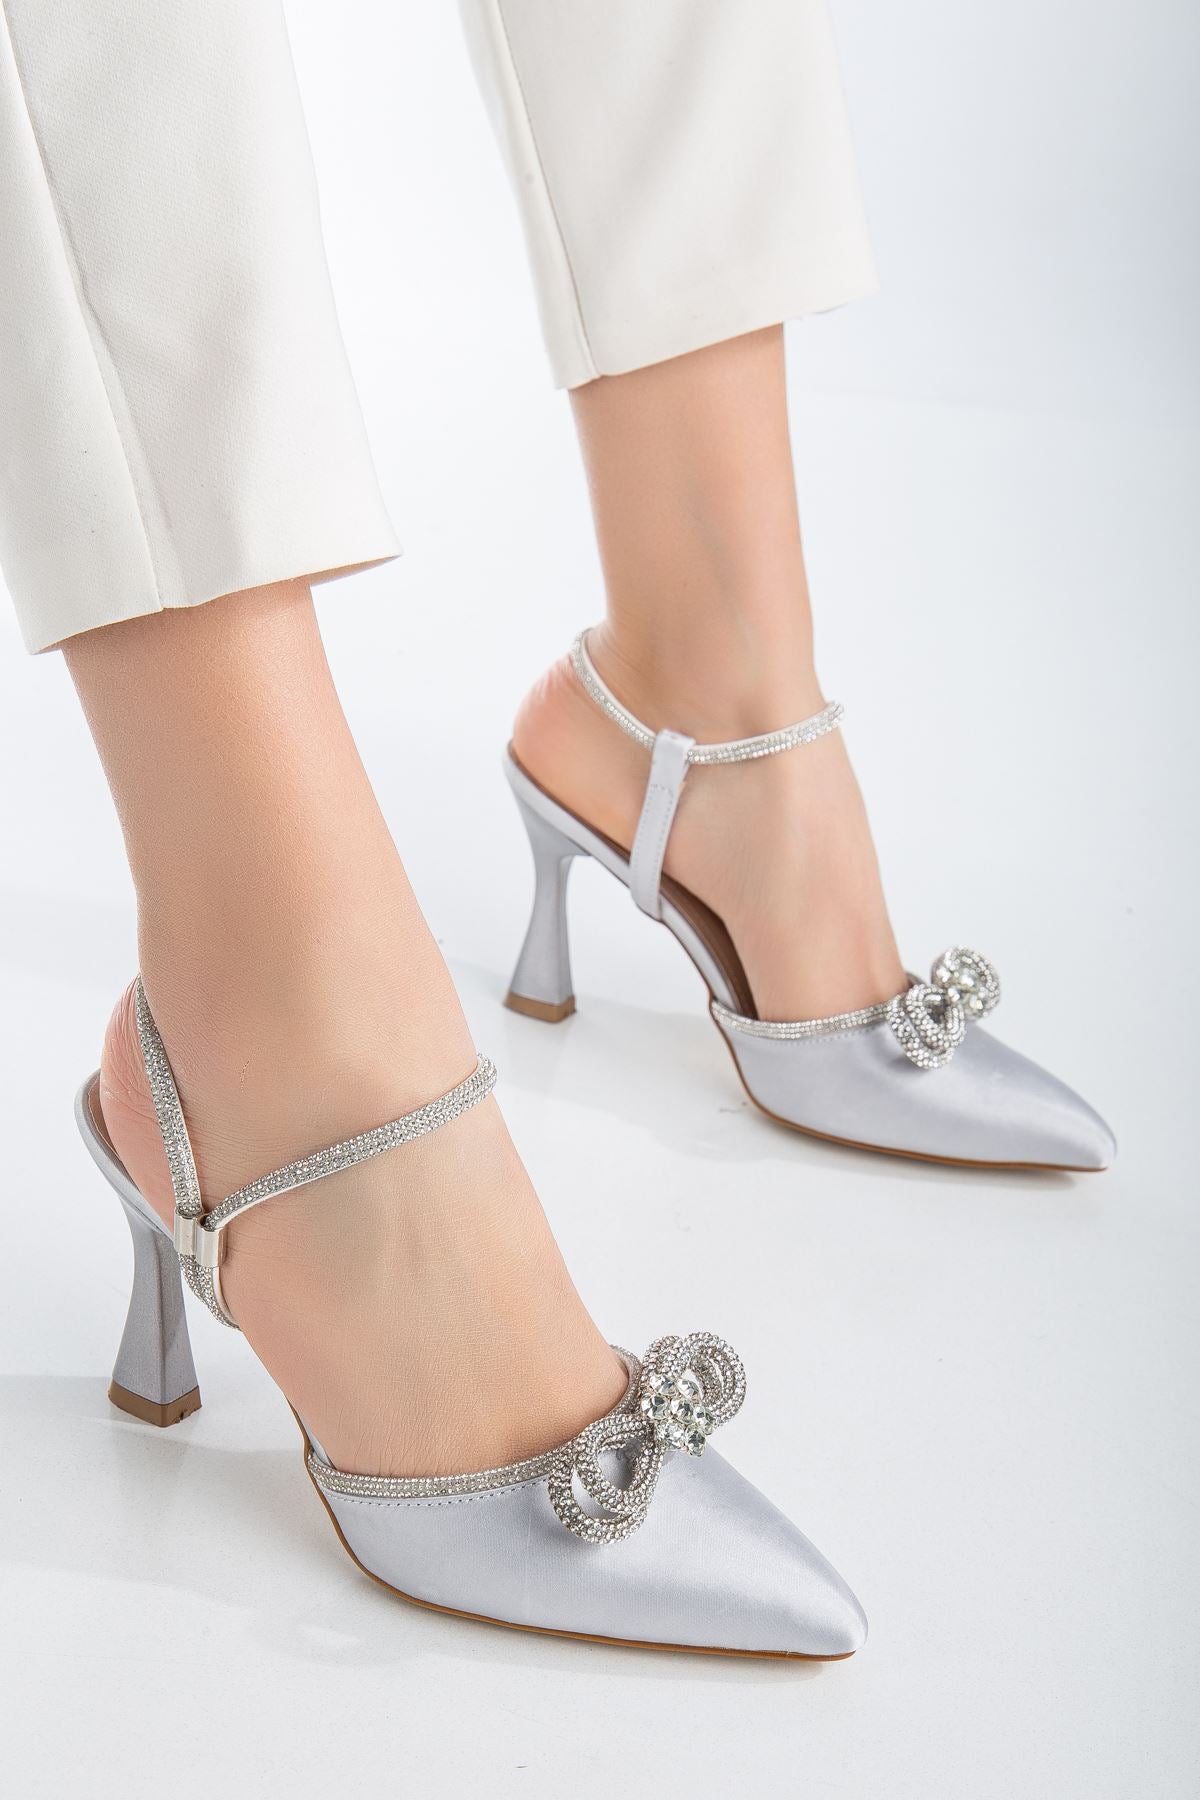 Women's Wilma Silver Satin Stoned Bow Detailed Pointed Toe Heeled Shoes - STREETMODE™